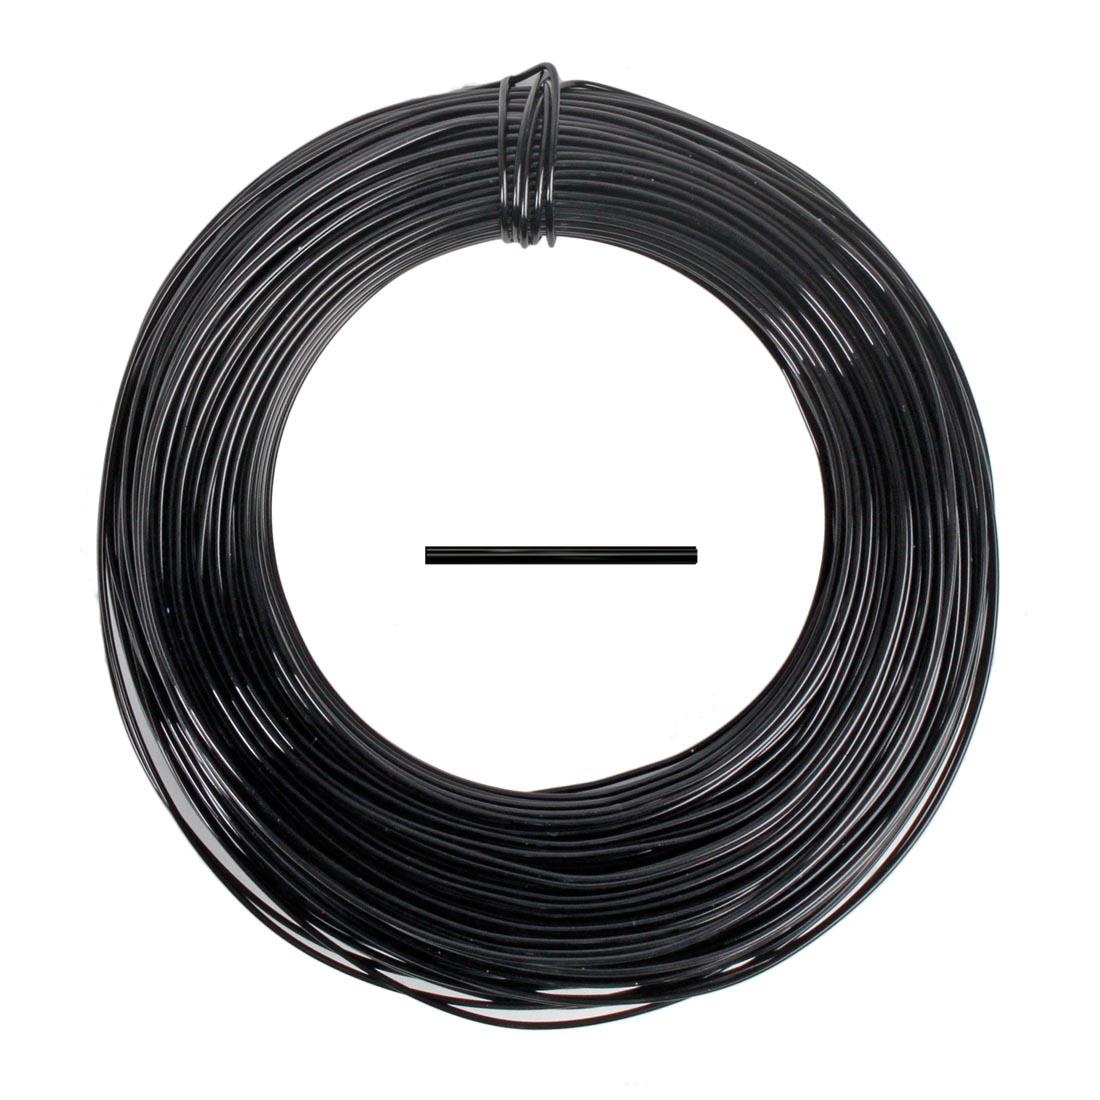 Bundle of Parawire Black Aluminum Wire with inset picture to show thickness